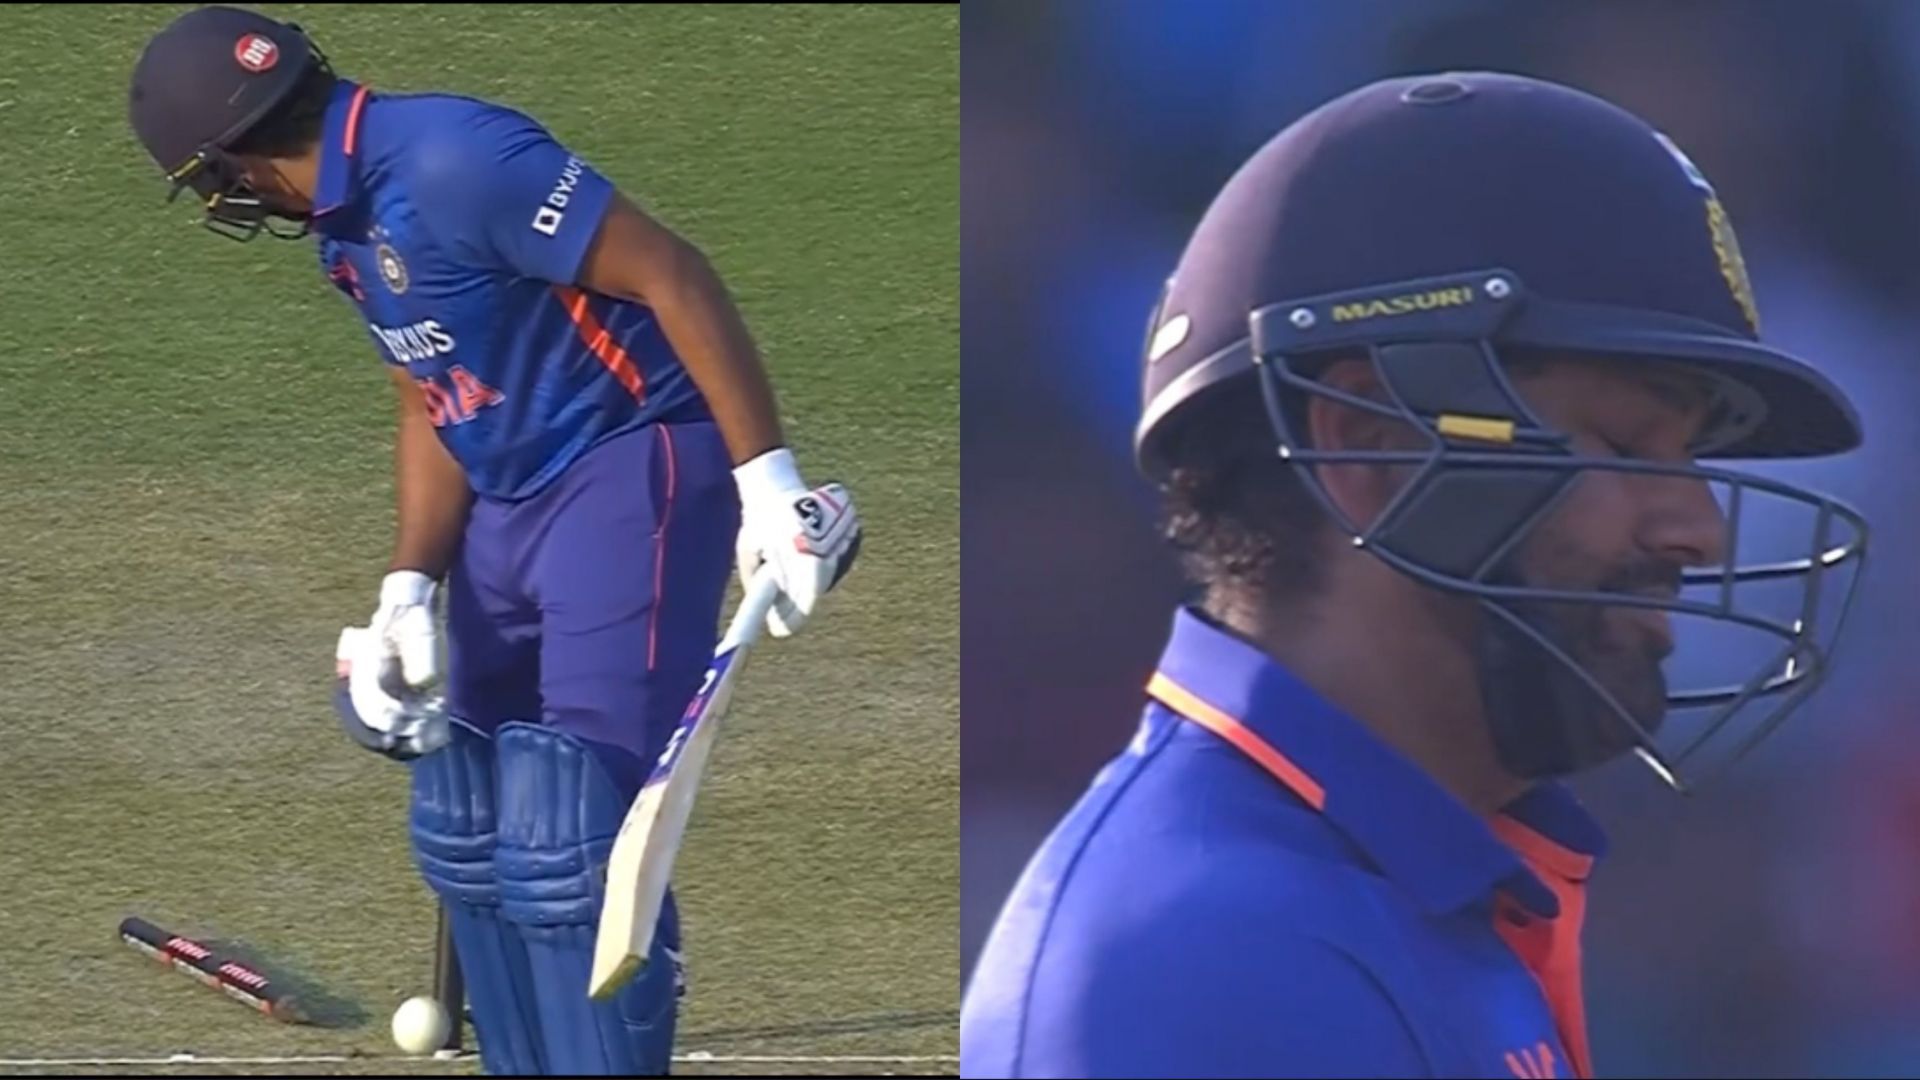 Rohit Sharma lost his wicket when he was batting on 83 (Image: BCCI)